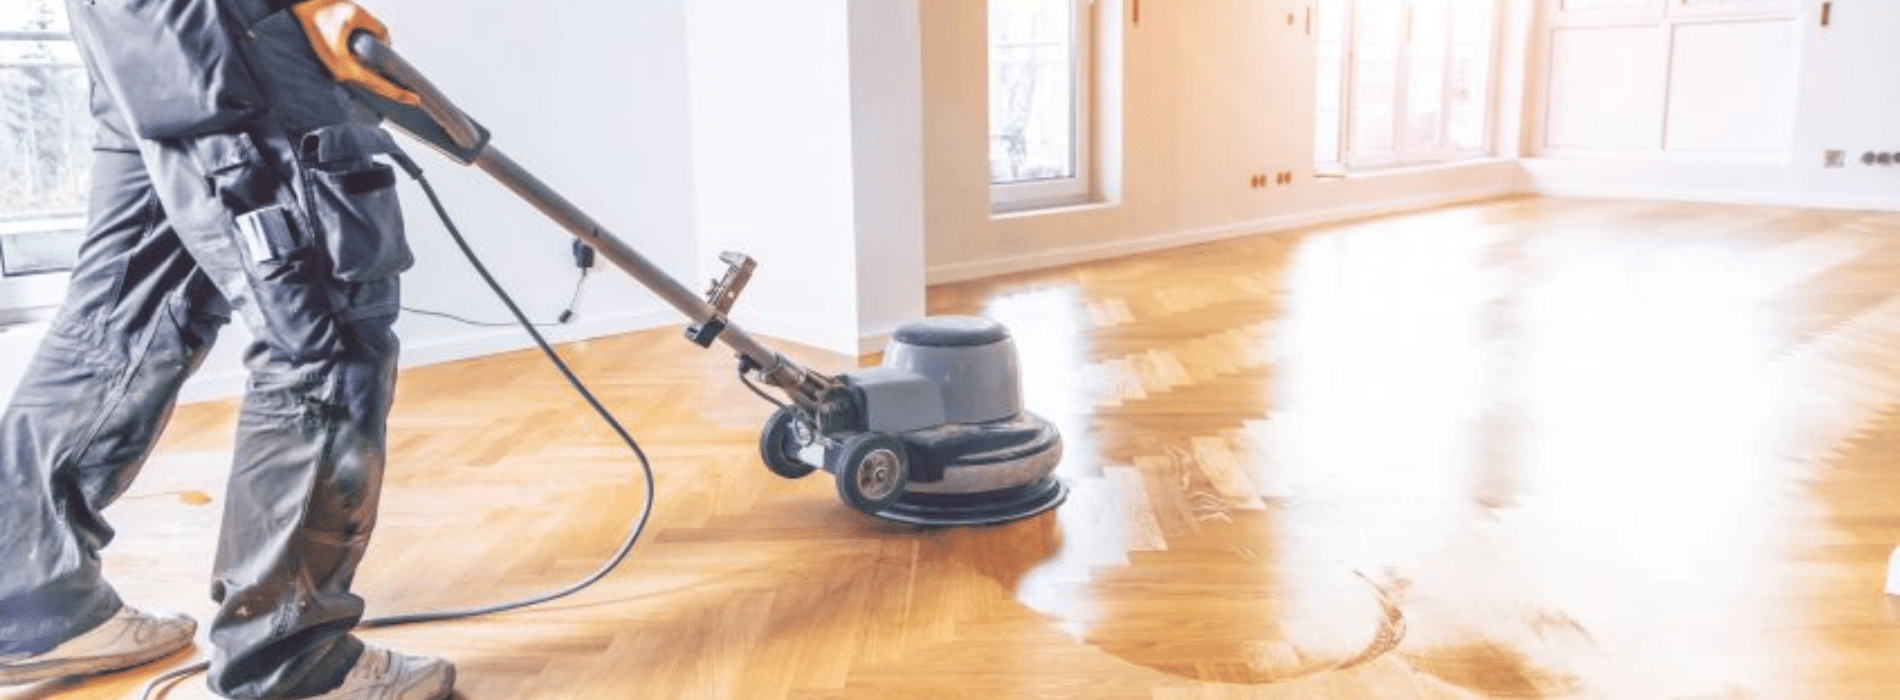 Mr Sander® in Heston, TW5, employing a 2200-effect, 250x750mm Bona belt buffer sander with a voltage of 220 and frequency of 60, meticulously restoring a herringbone floor and maintaining cleanliness with a reliable HEPA dust extraction system.